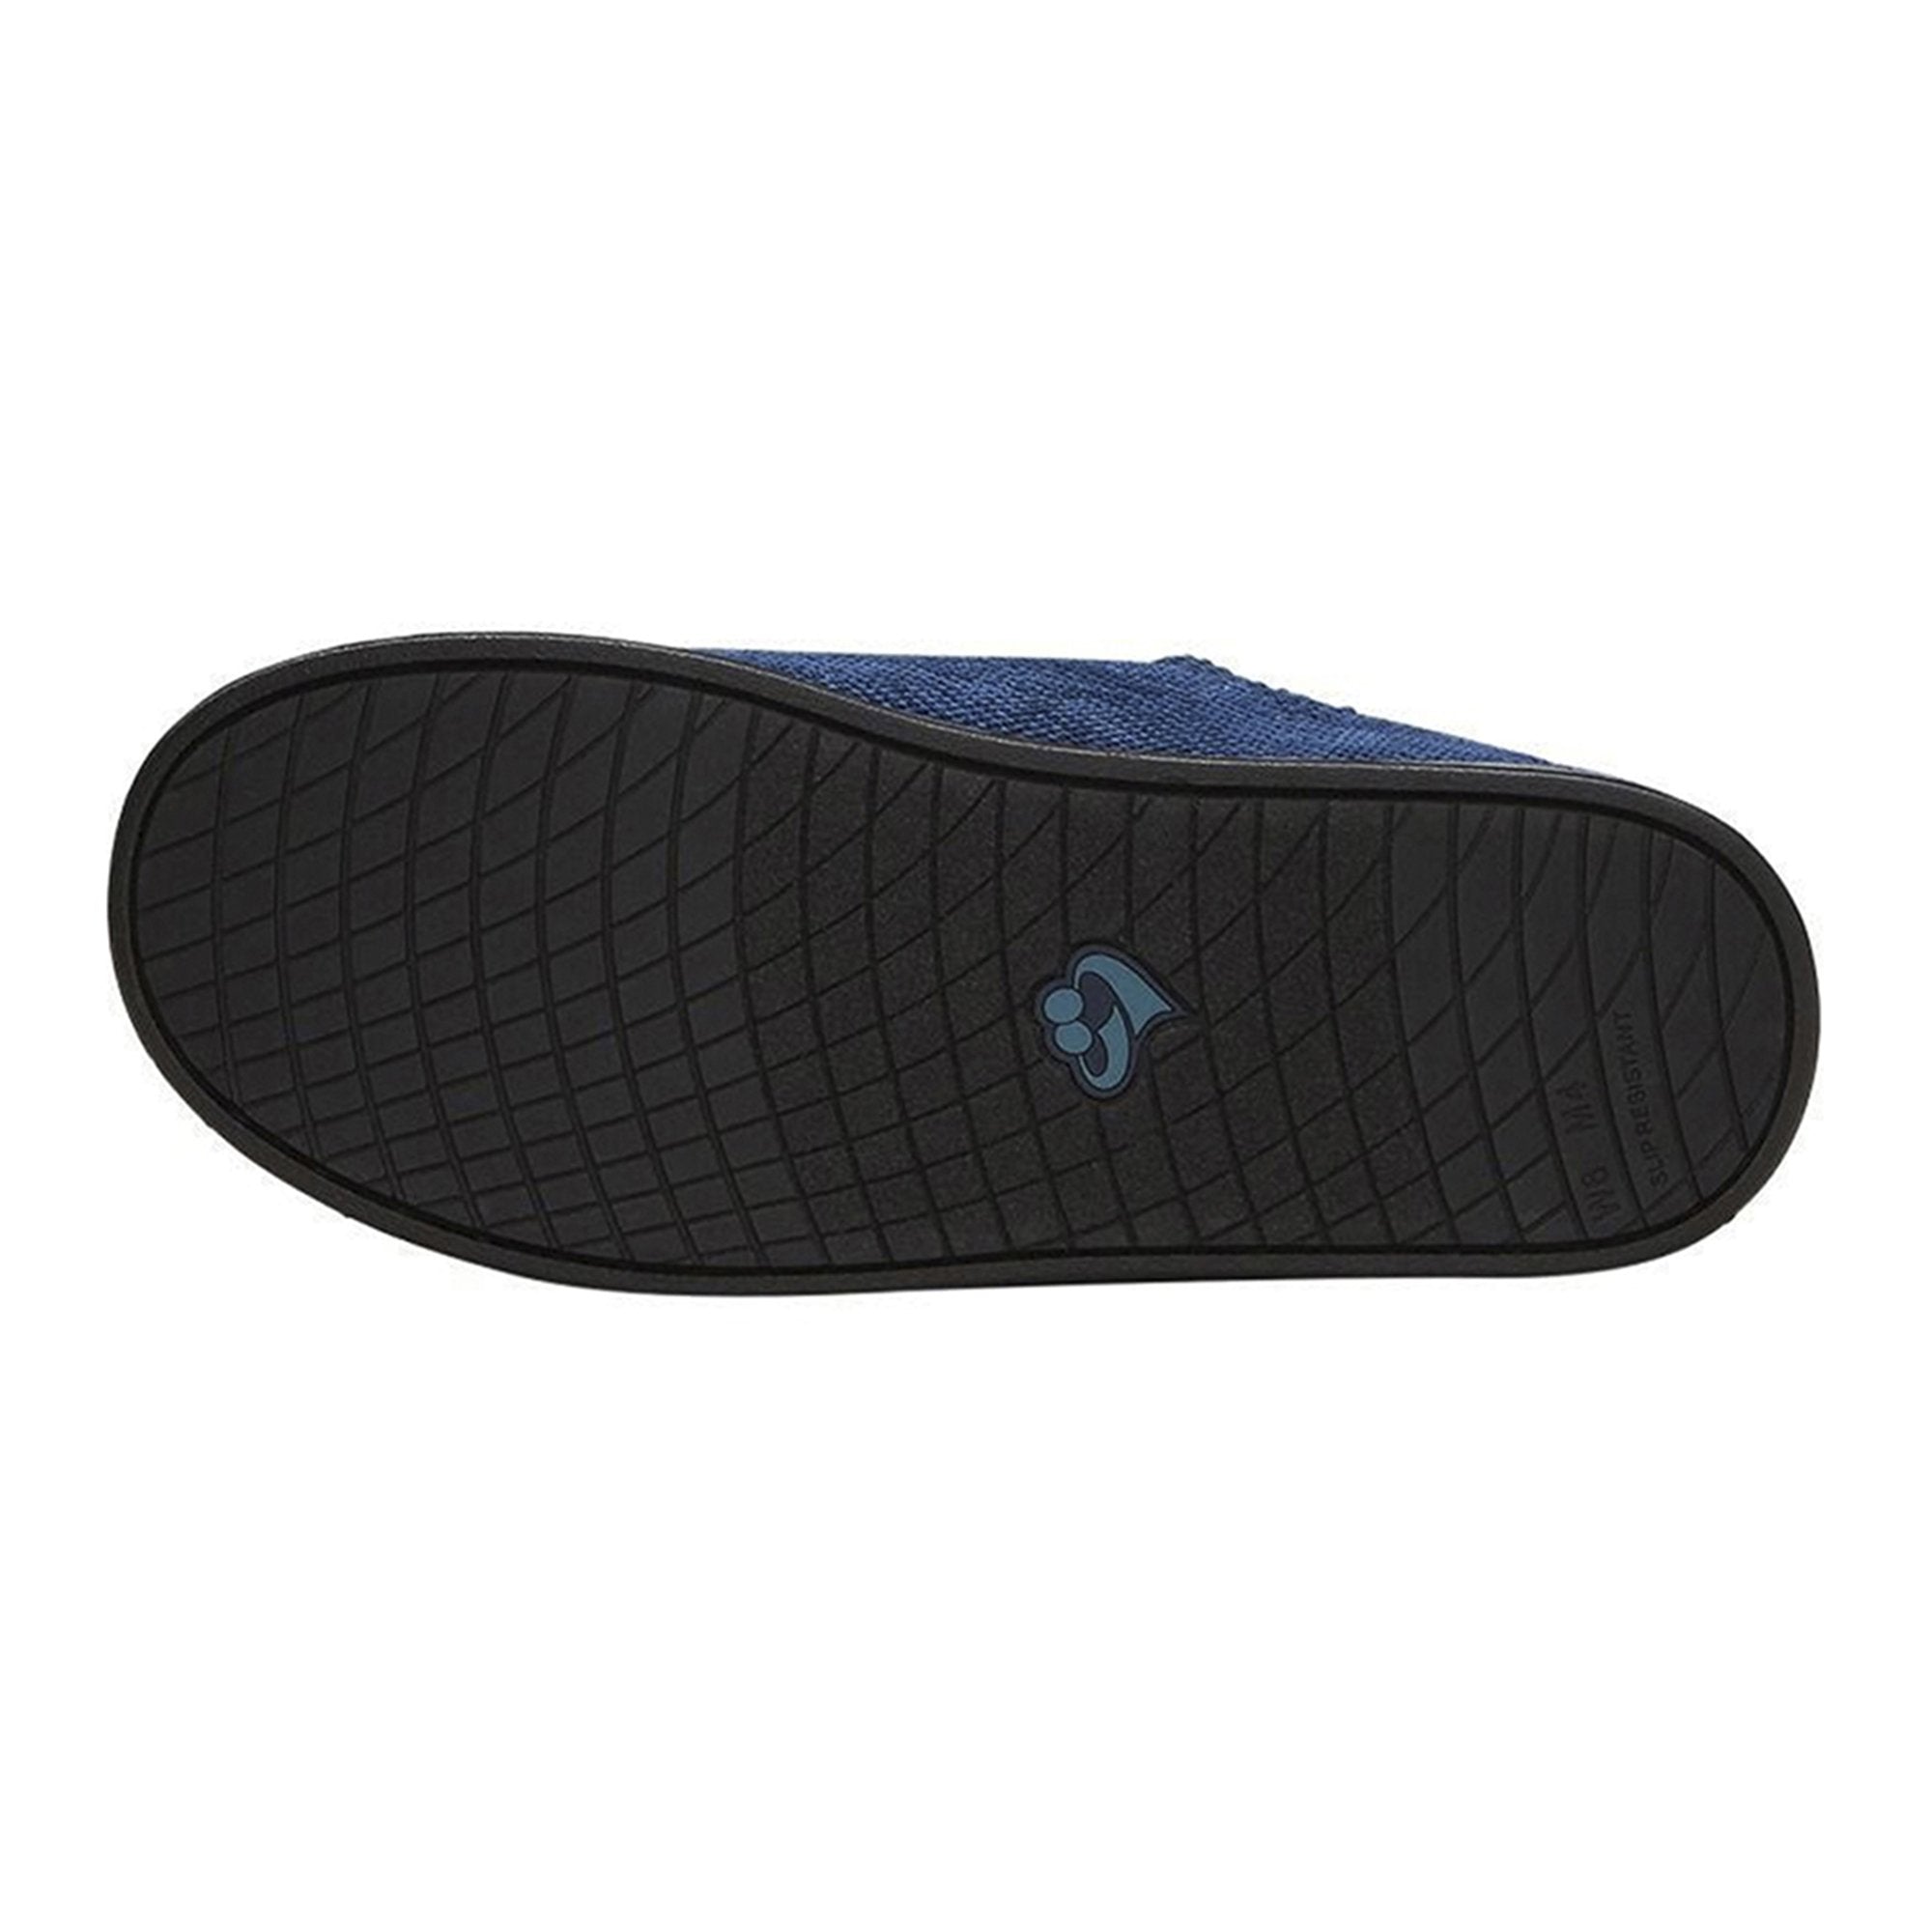 Slippers Silverts® Size 6 / 2X-Wide Navy Blue Easy Closure